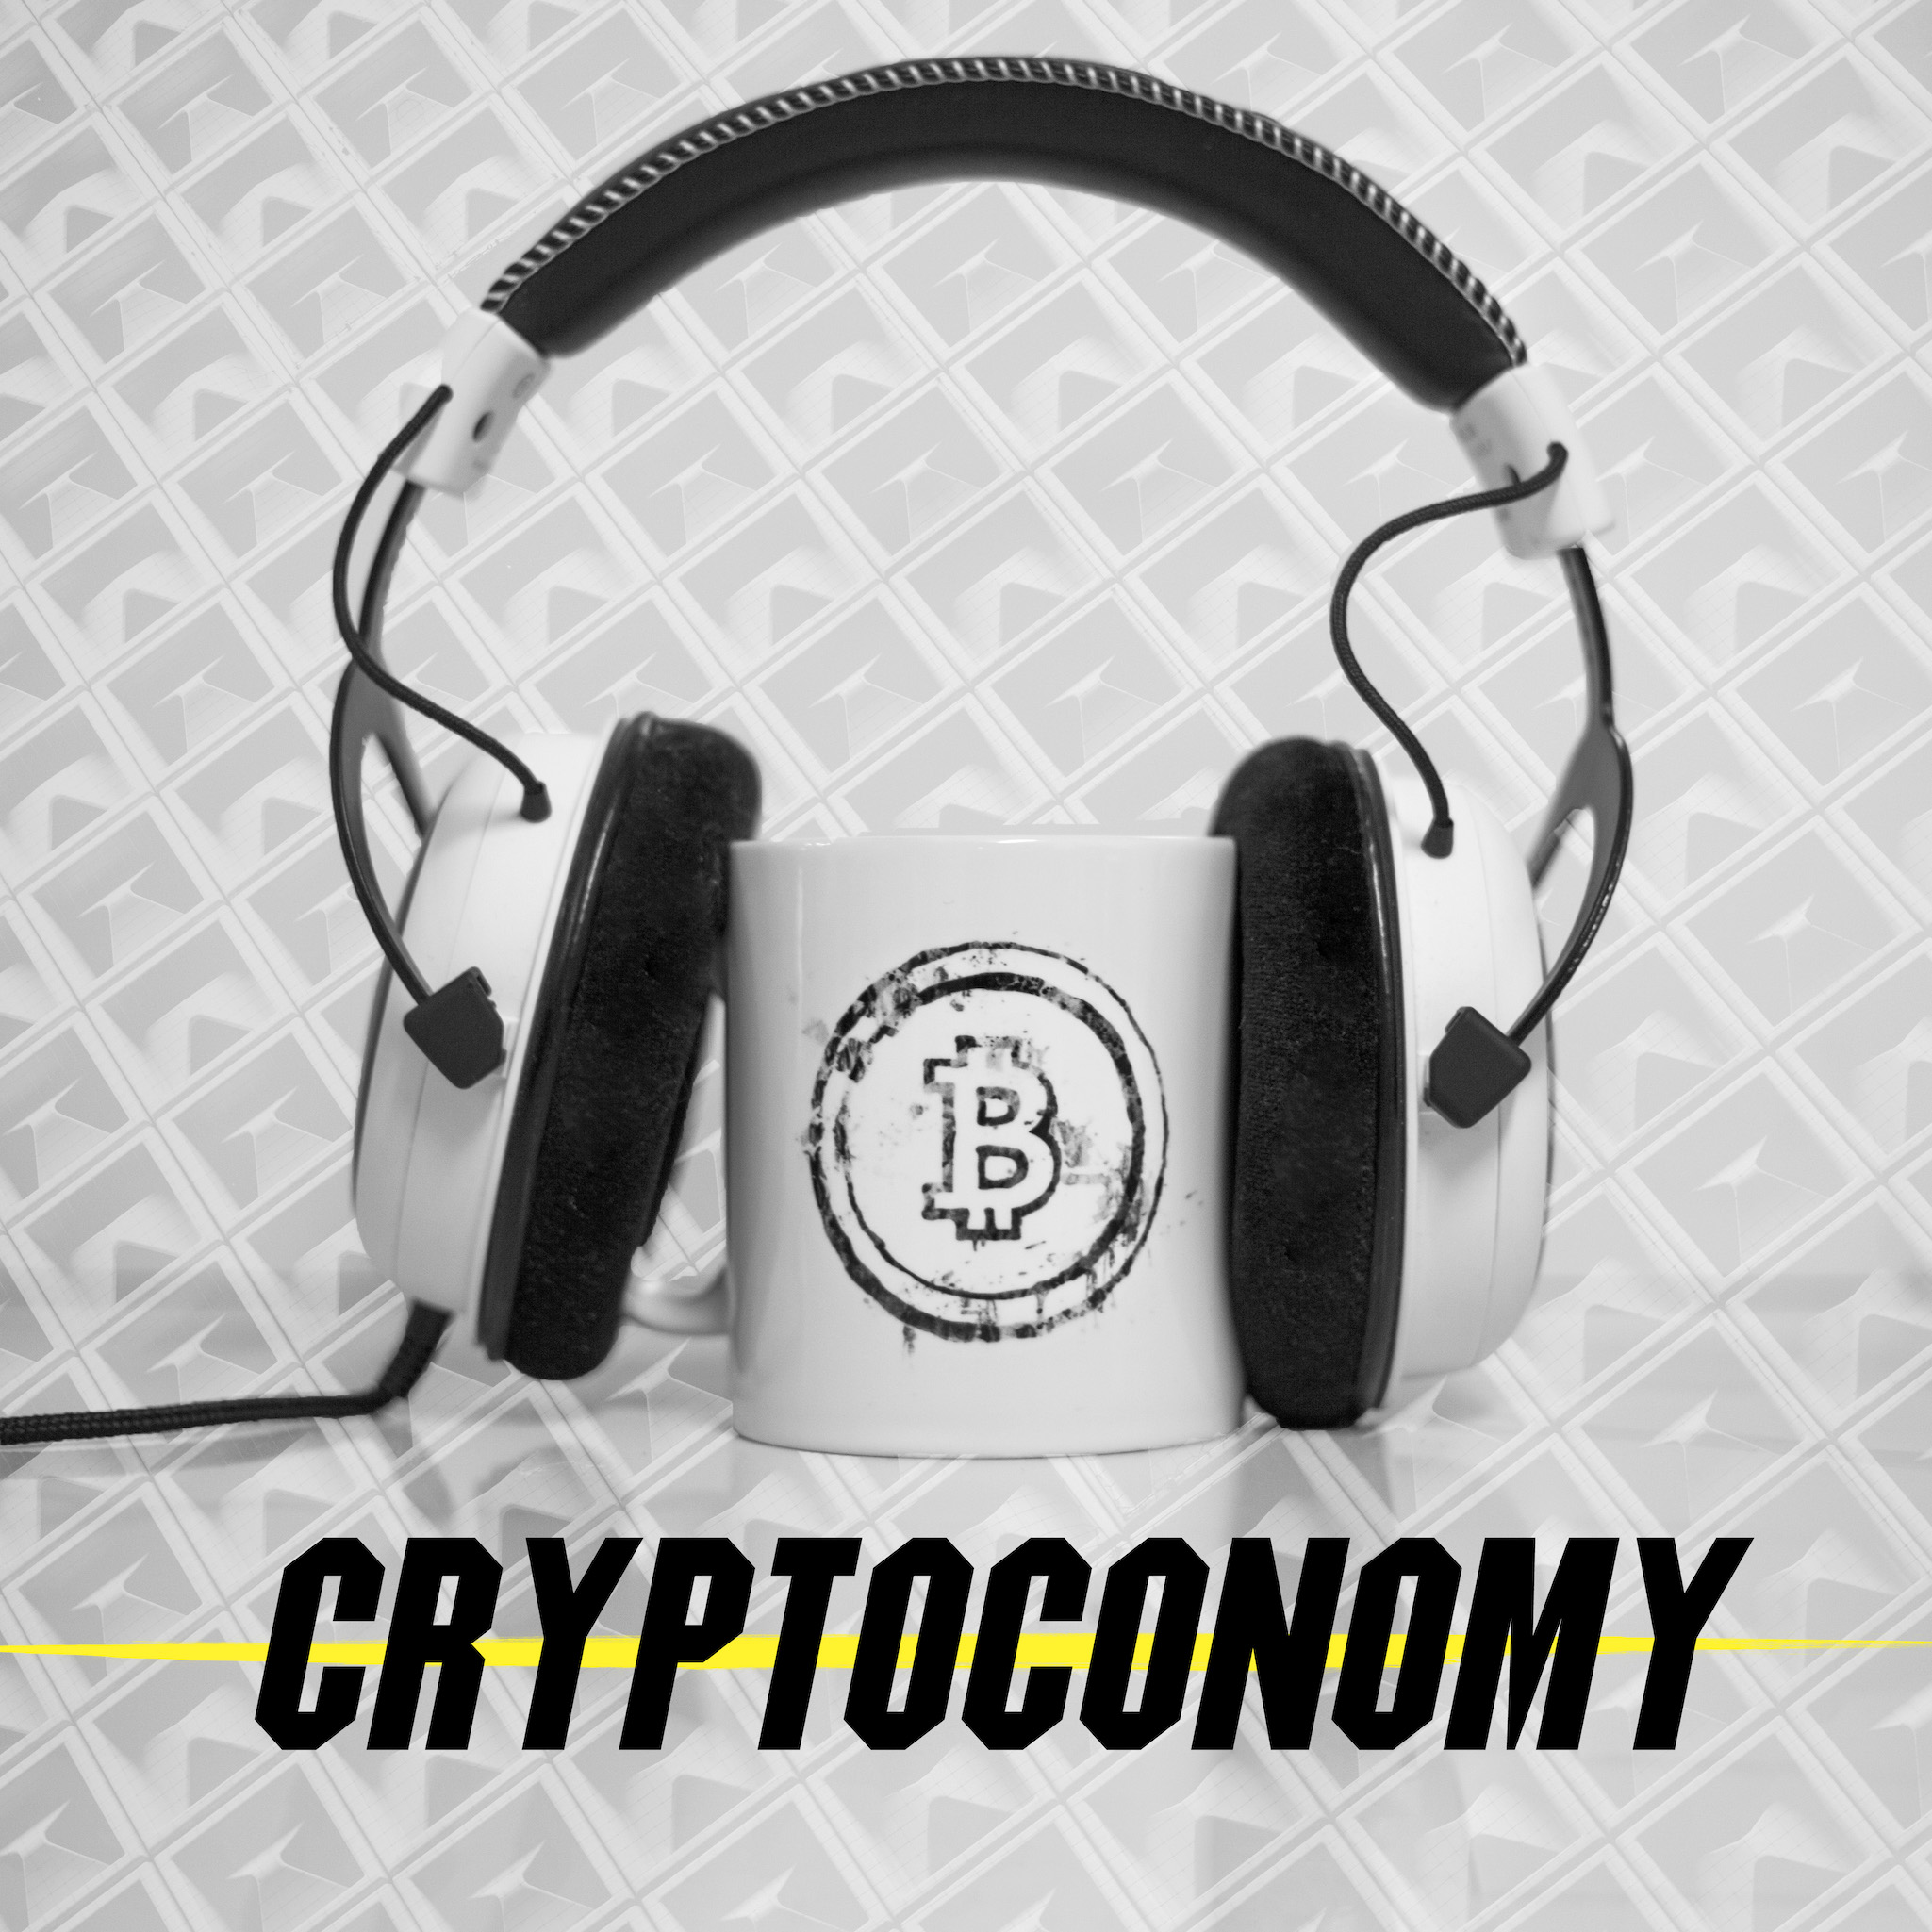 CryptoQuikRead_096 - Giacomo's Tweetstorm, Coinage in the Age of Bitcoin